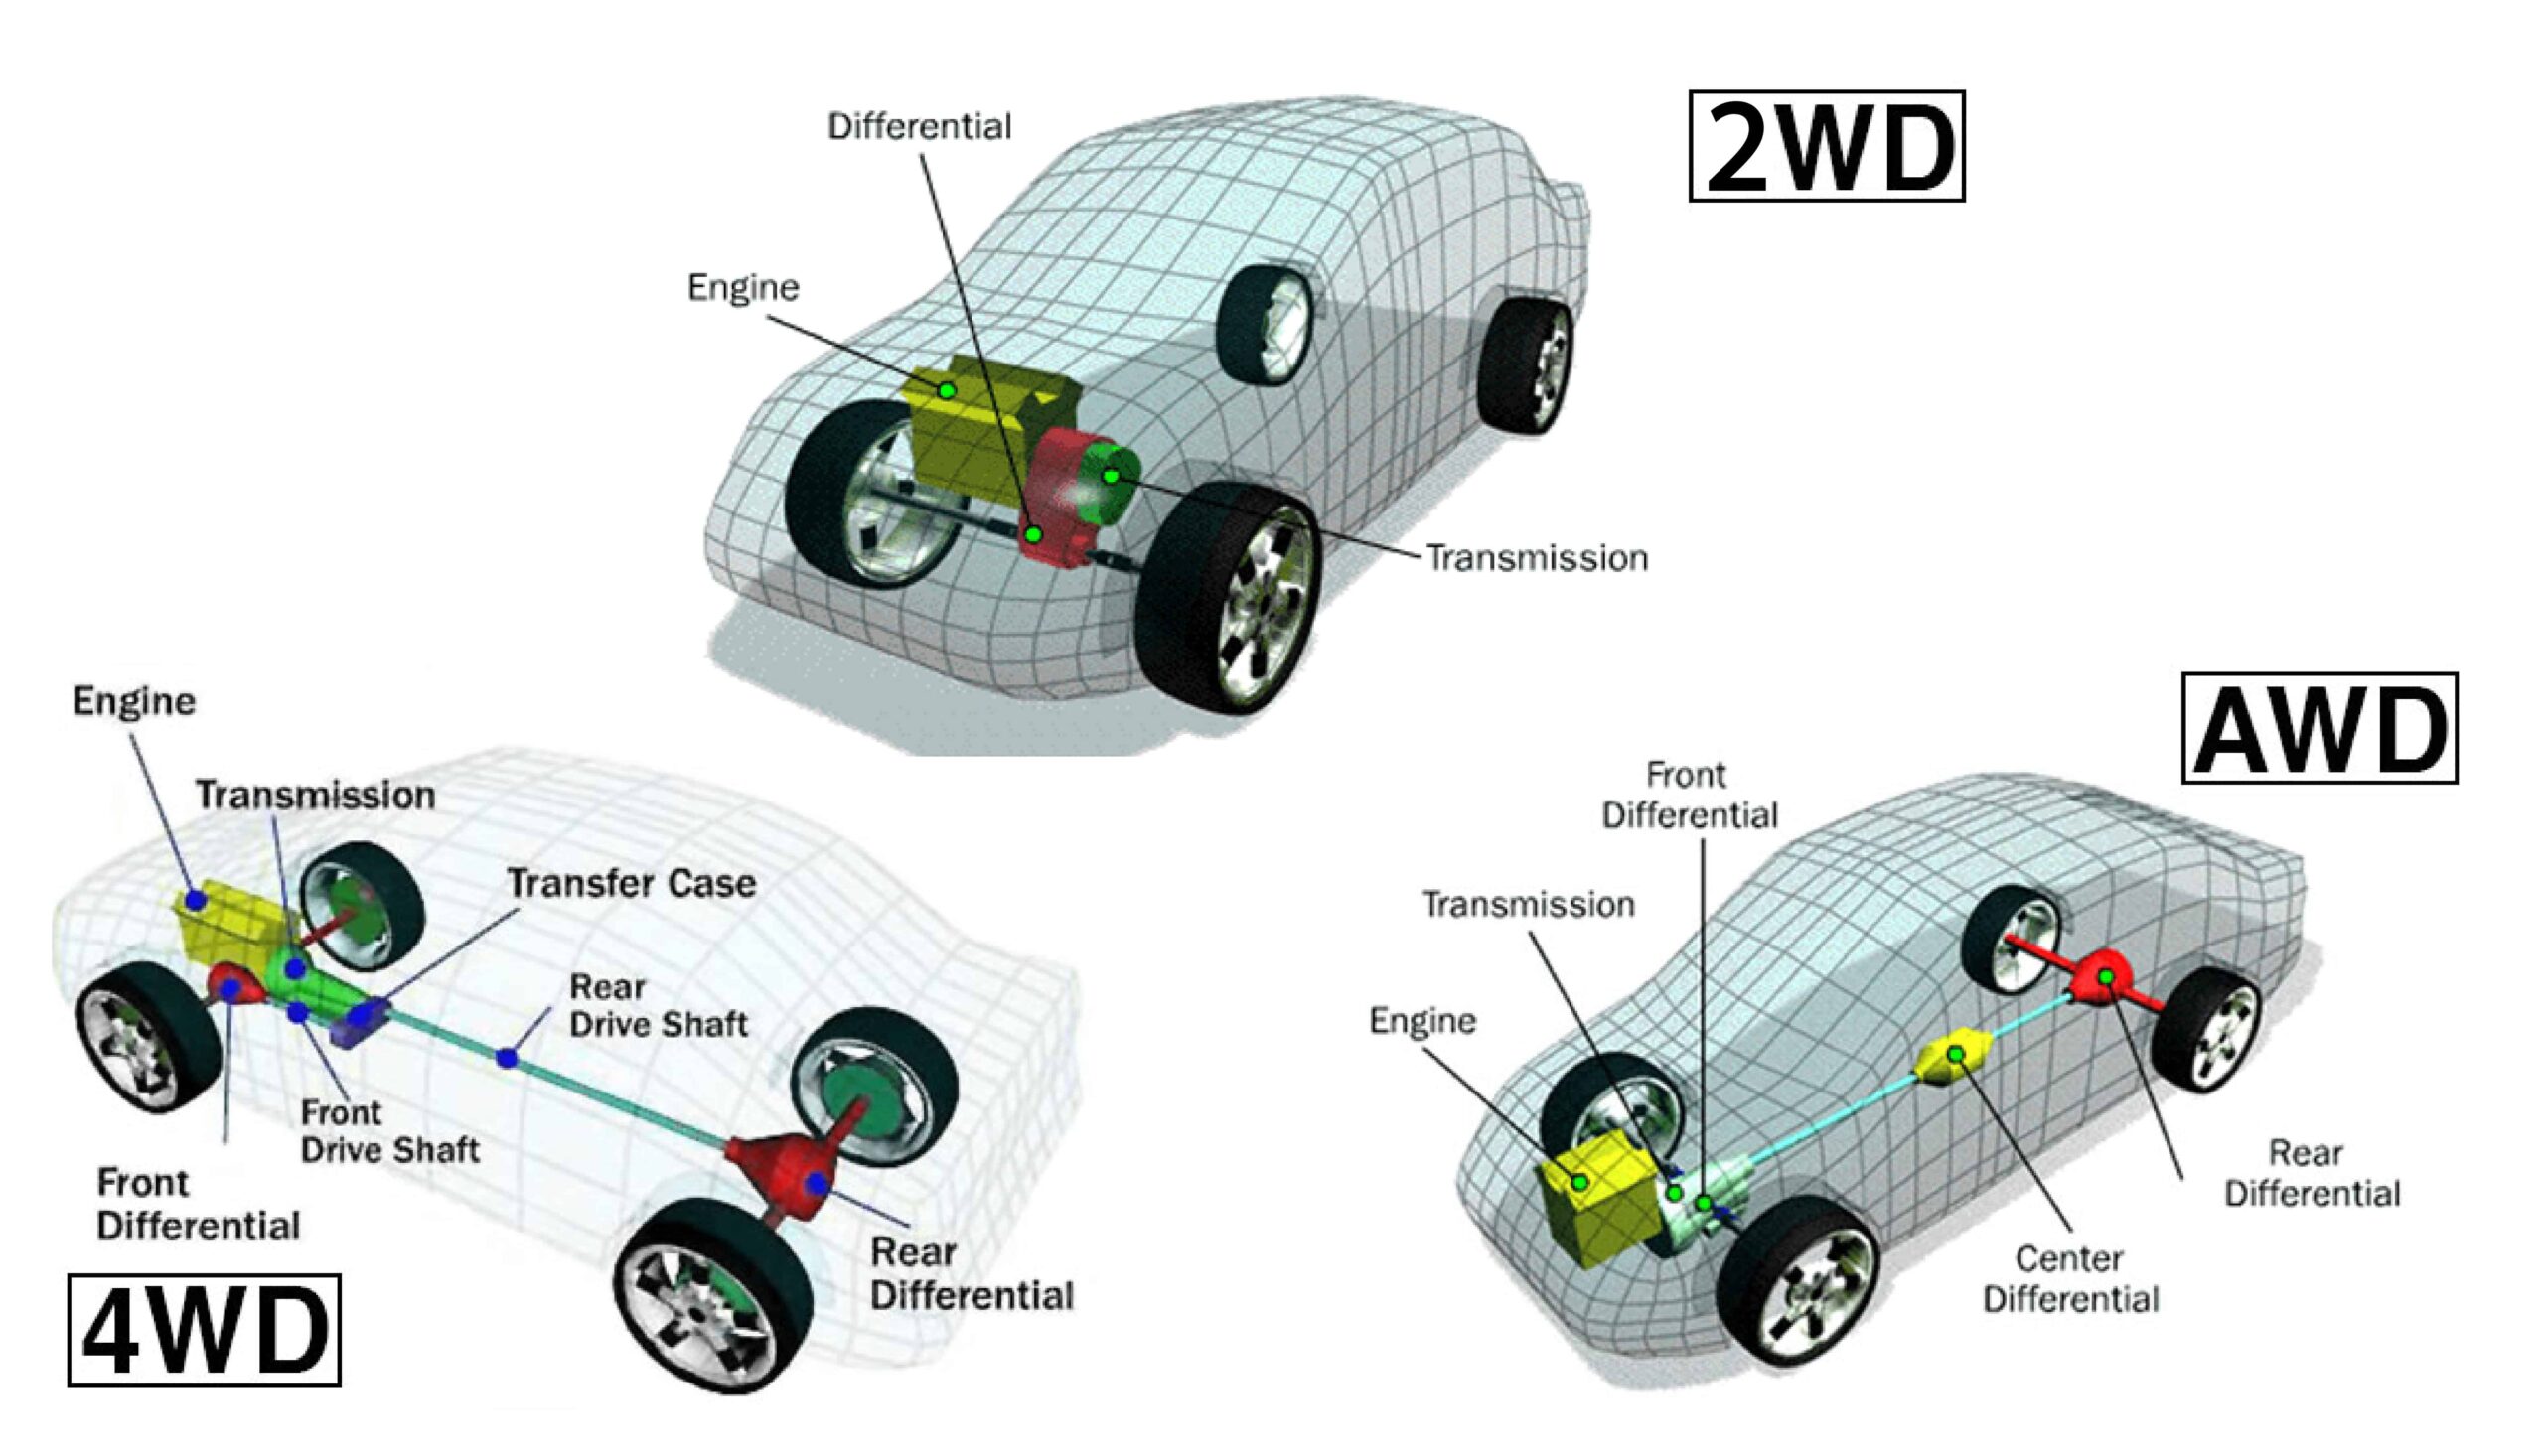 2WD vs 4WD vs AWD - What’s the difference?|4WD vs AWD - What’s the difference?